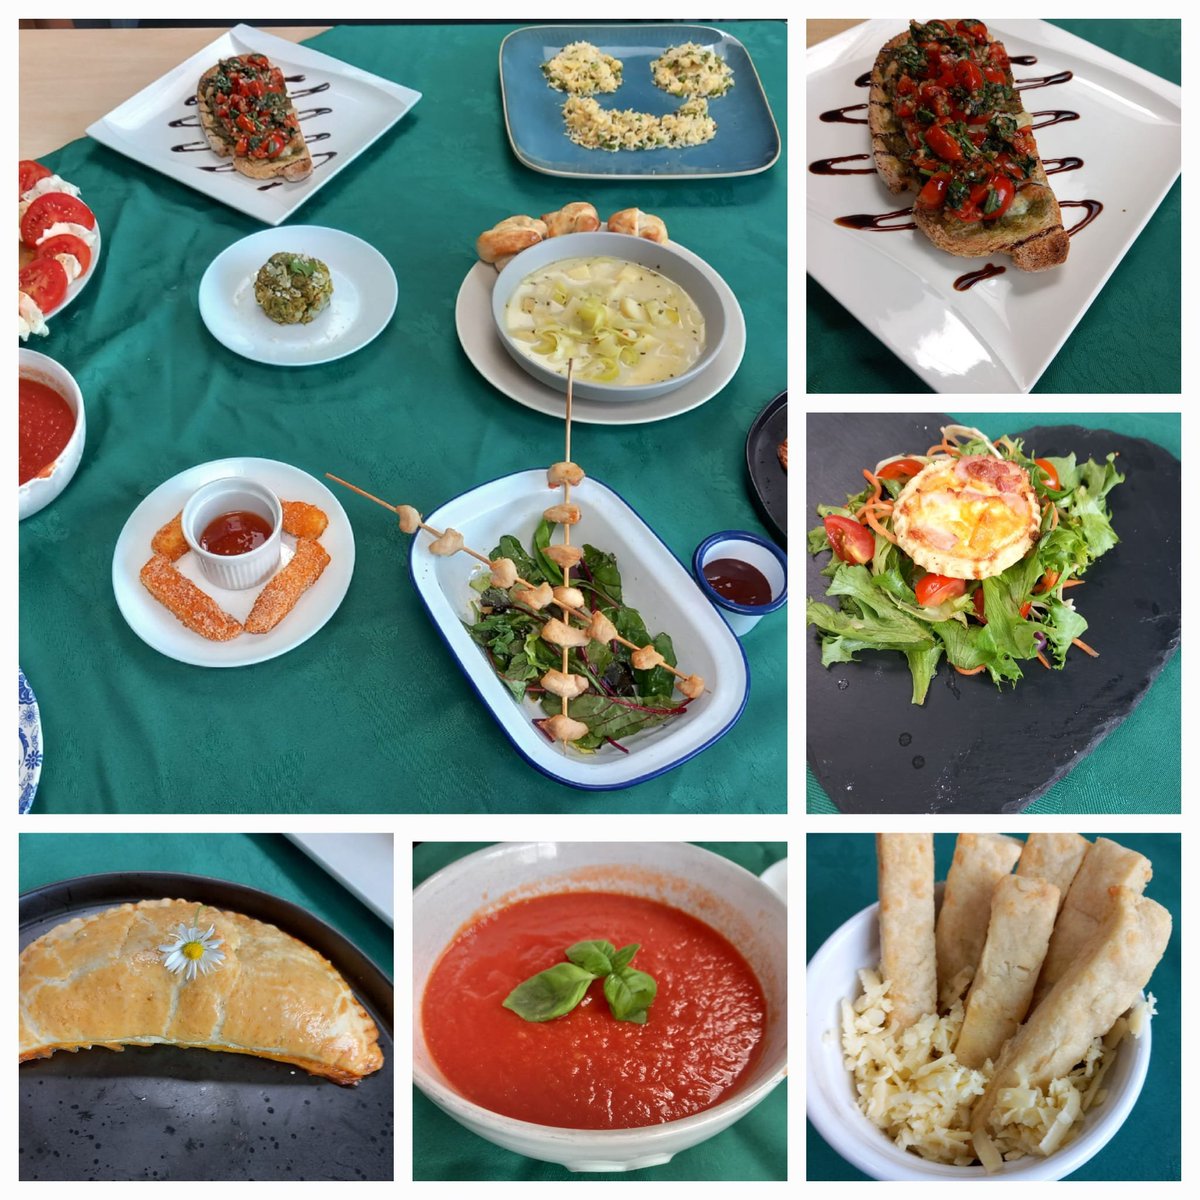 This week in Mrs Parkinson's Masterchef Kitchen, 8 Brook, Hill and Tower whipped up some delicious starters. #Learningtogetherforsuccess